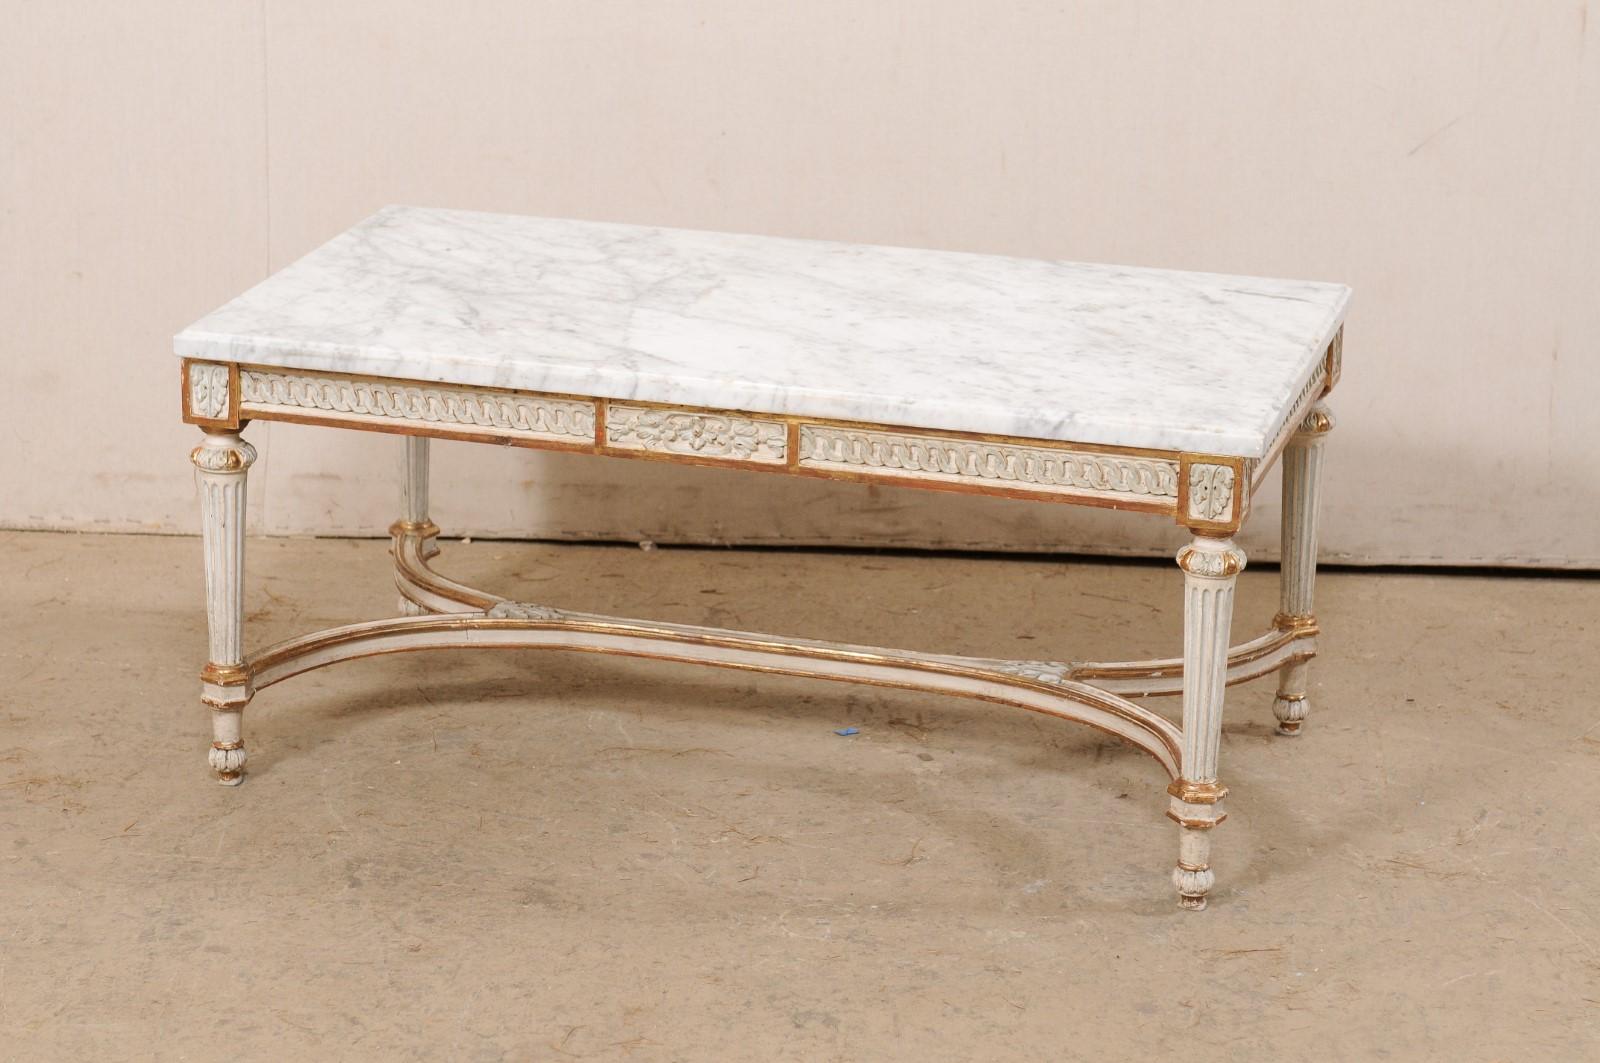 A French carved and painted wood coffee table with marble top from the mid 20th century. This vintage coffee table from France has a rectangular-shaped marble top (white with gray veining) which rests upon a wooden base with apron carved in a